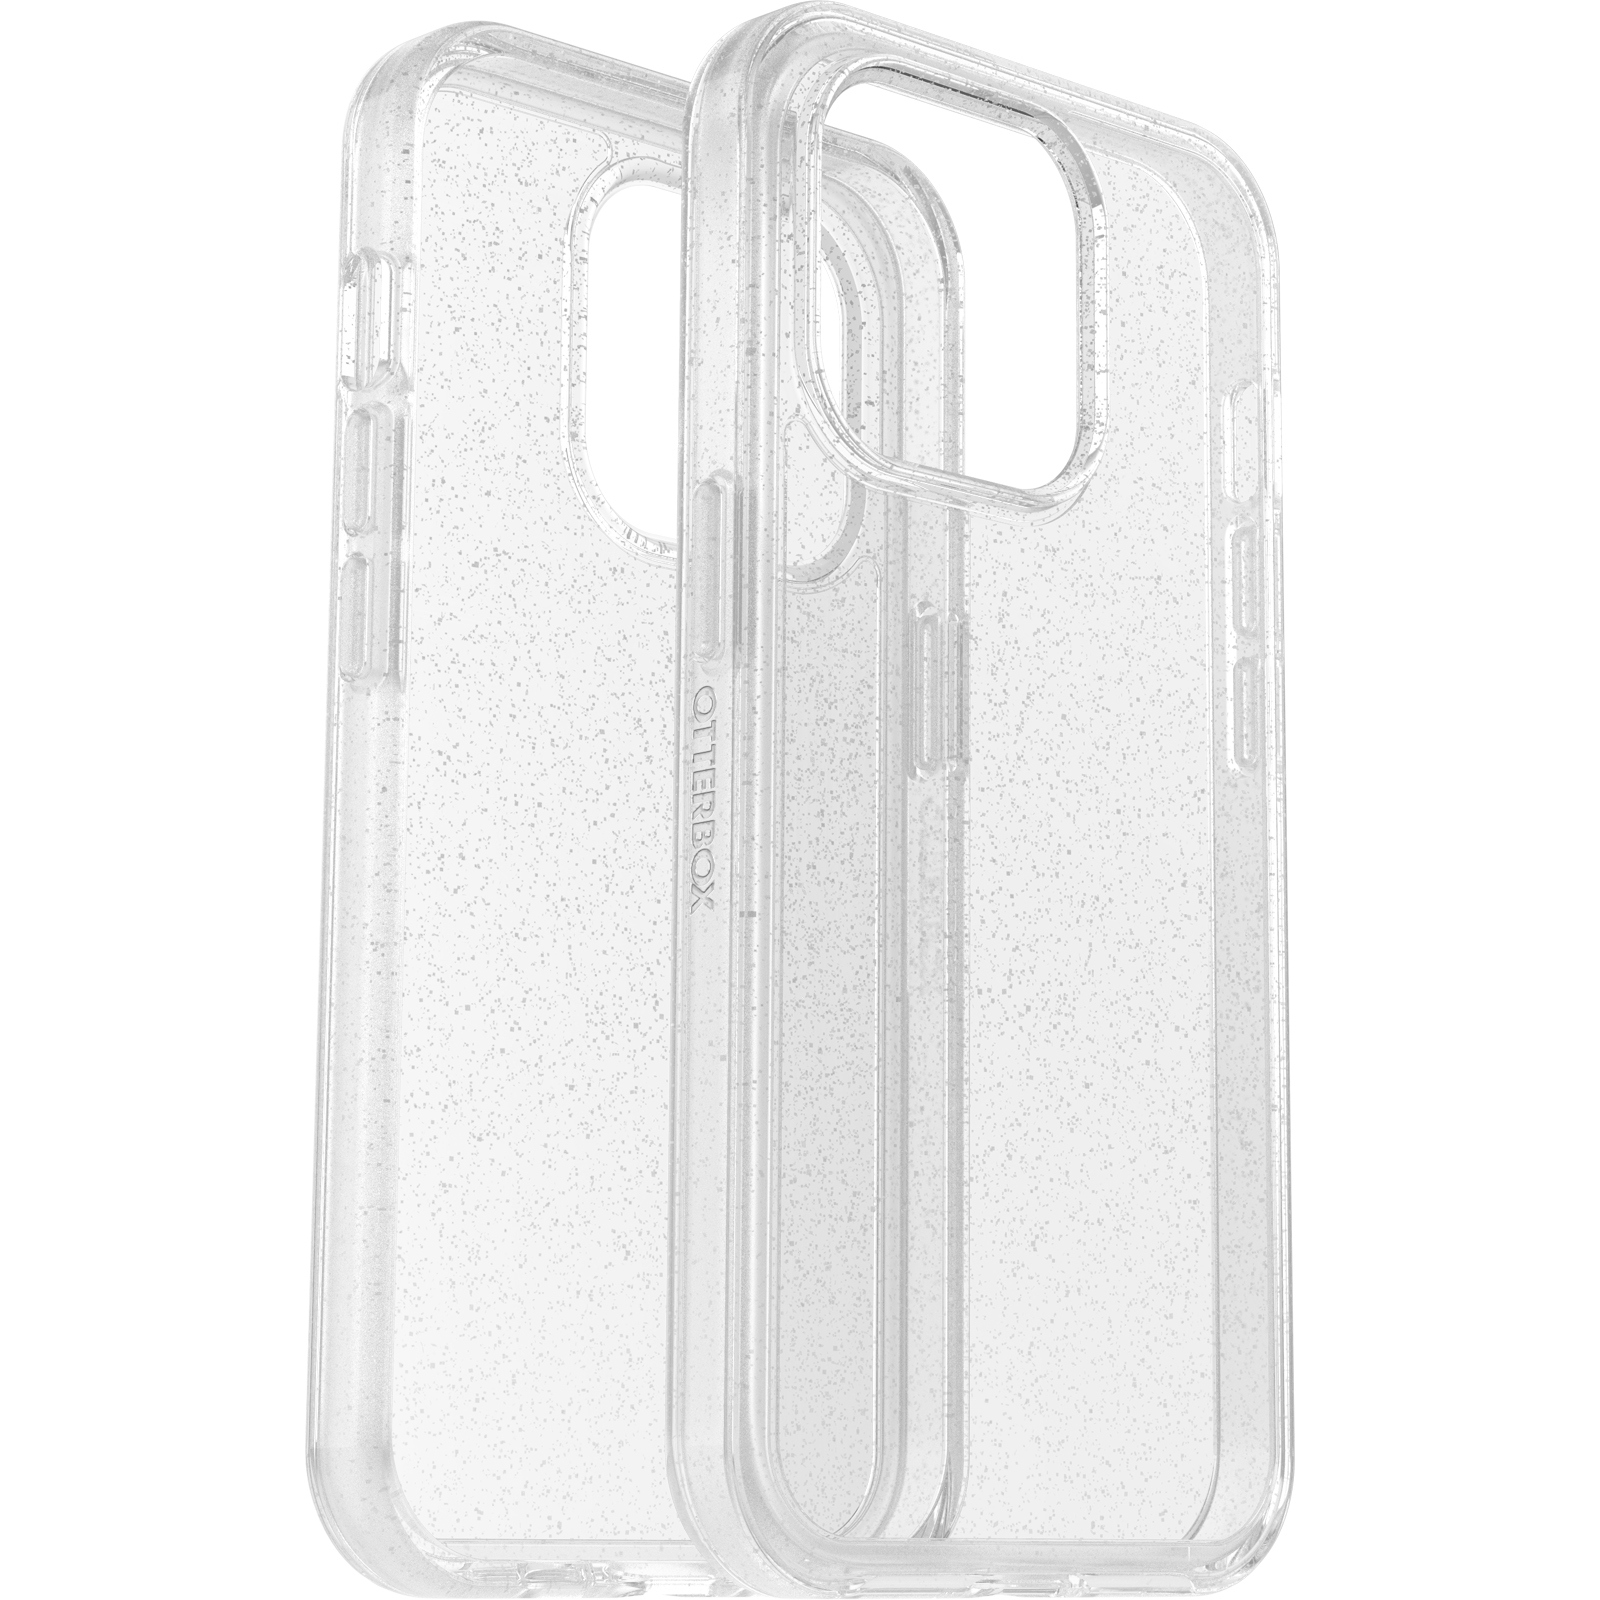 14 PRO, IPHONE Backcover, OTTERBOX Symmetry, CLEAR APPLE,